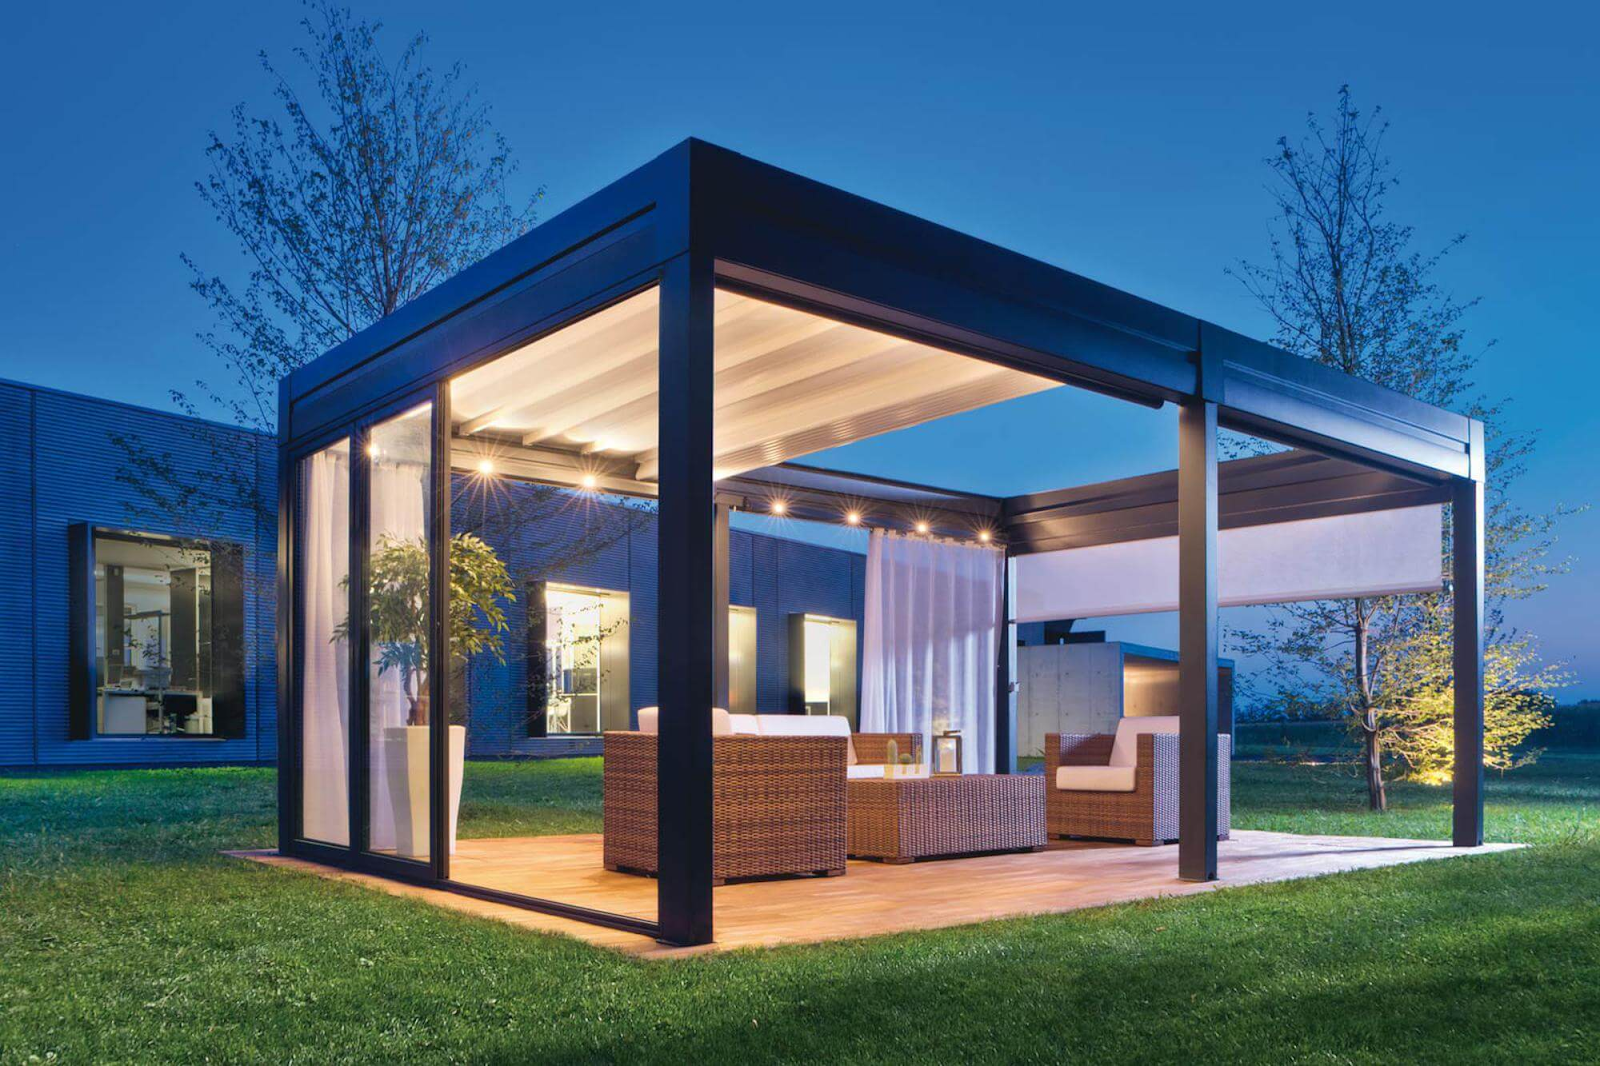 Illuminated free-standing pergola with a partially retracted cover